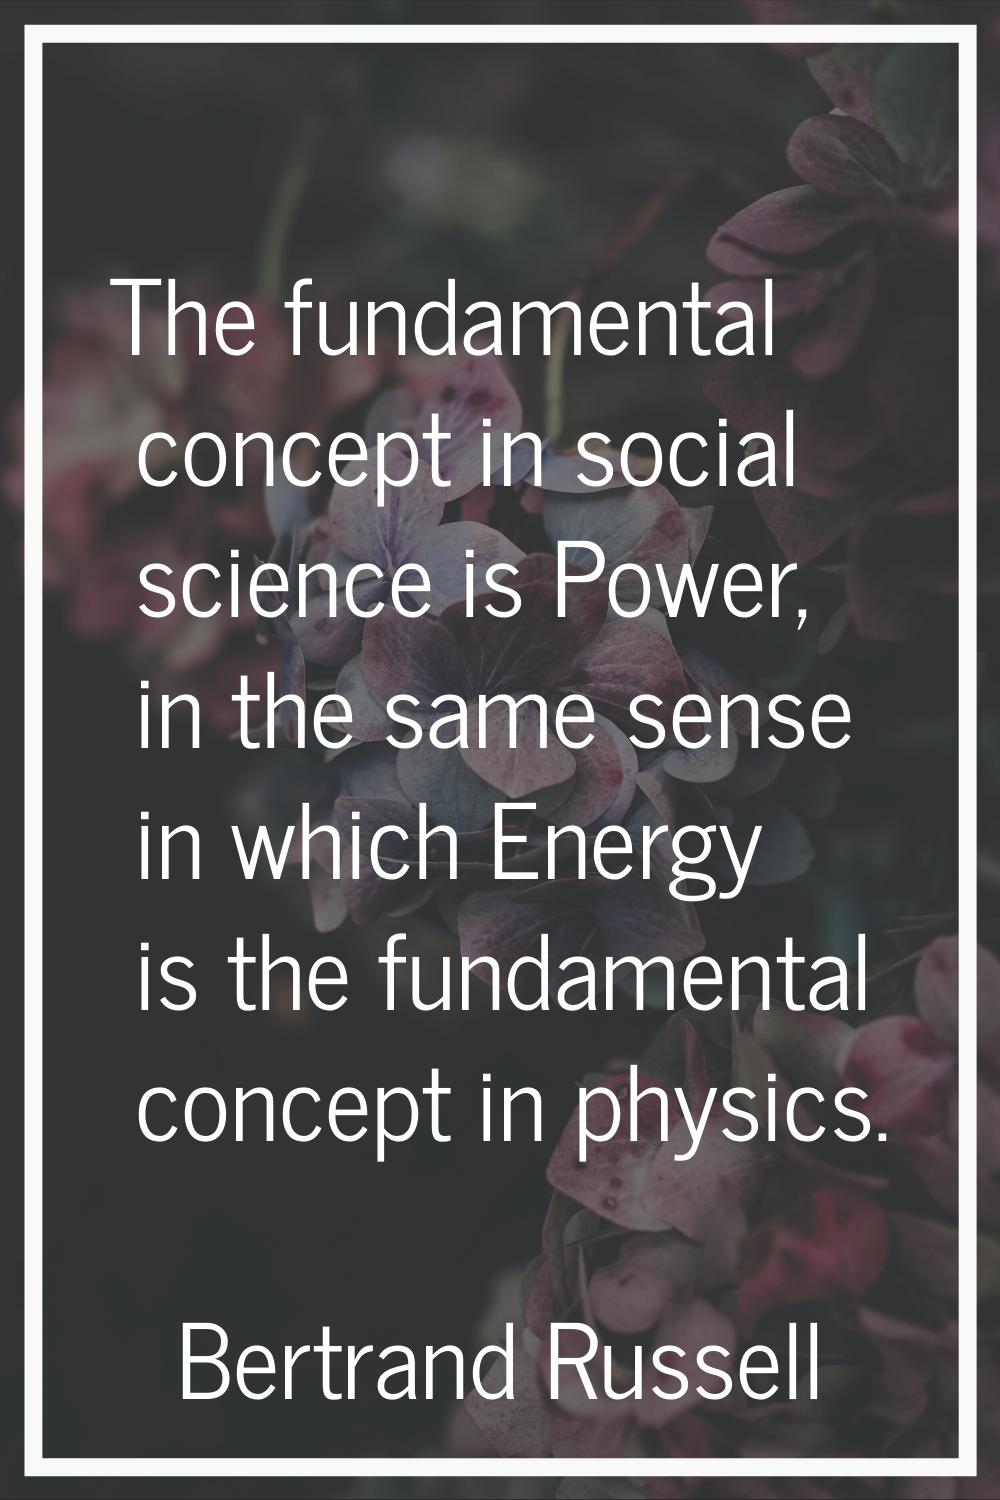 The fundamental concept in social science is Power, in the same sense in which Energy is the fundam